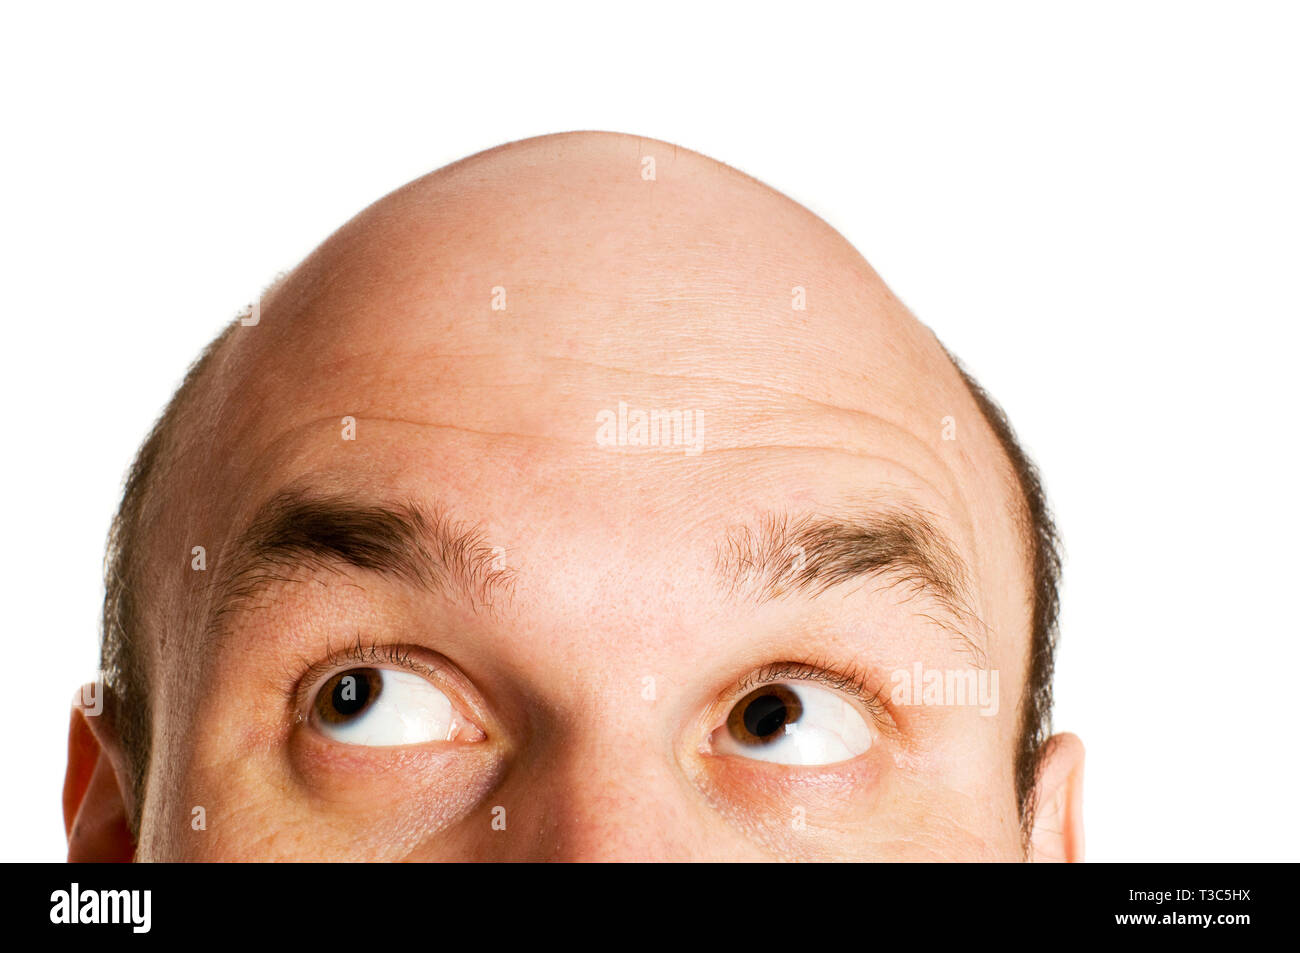 bald head looking up isolated Stock Photo